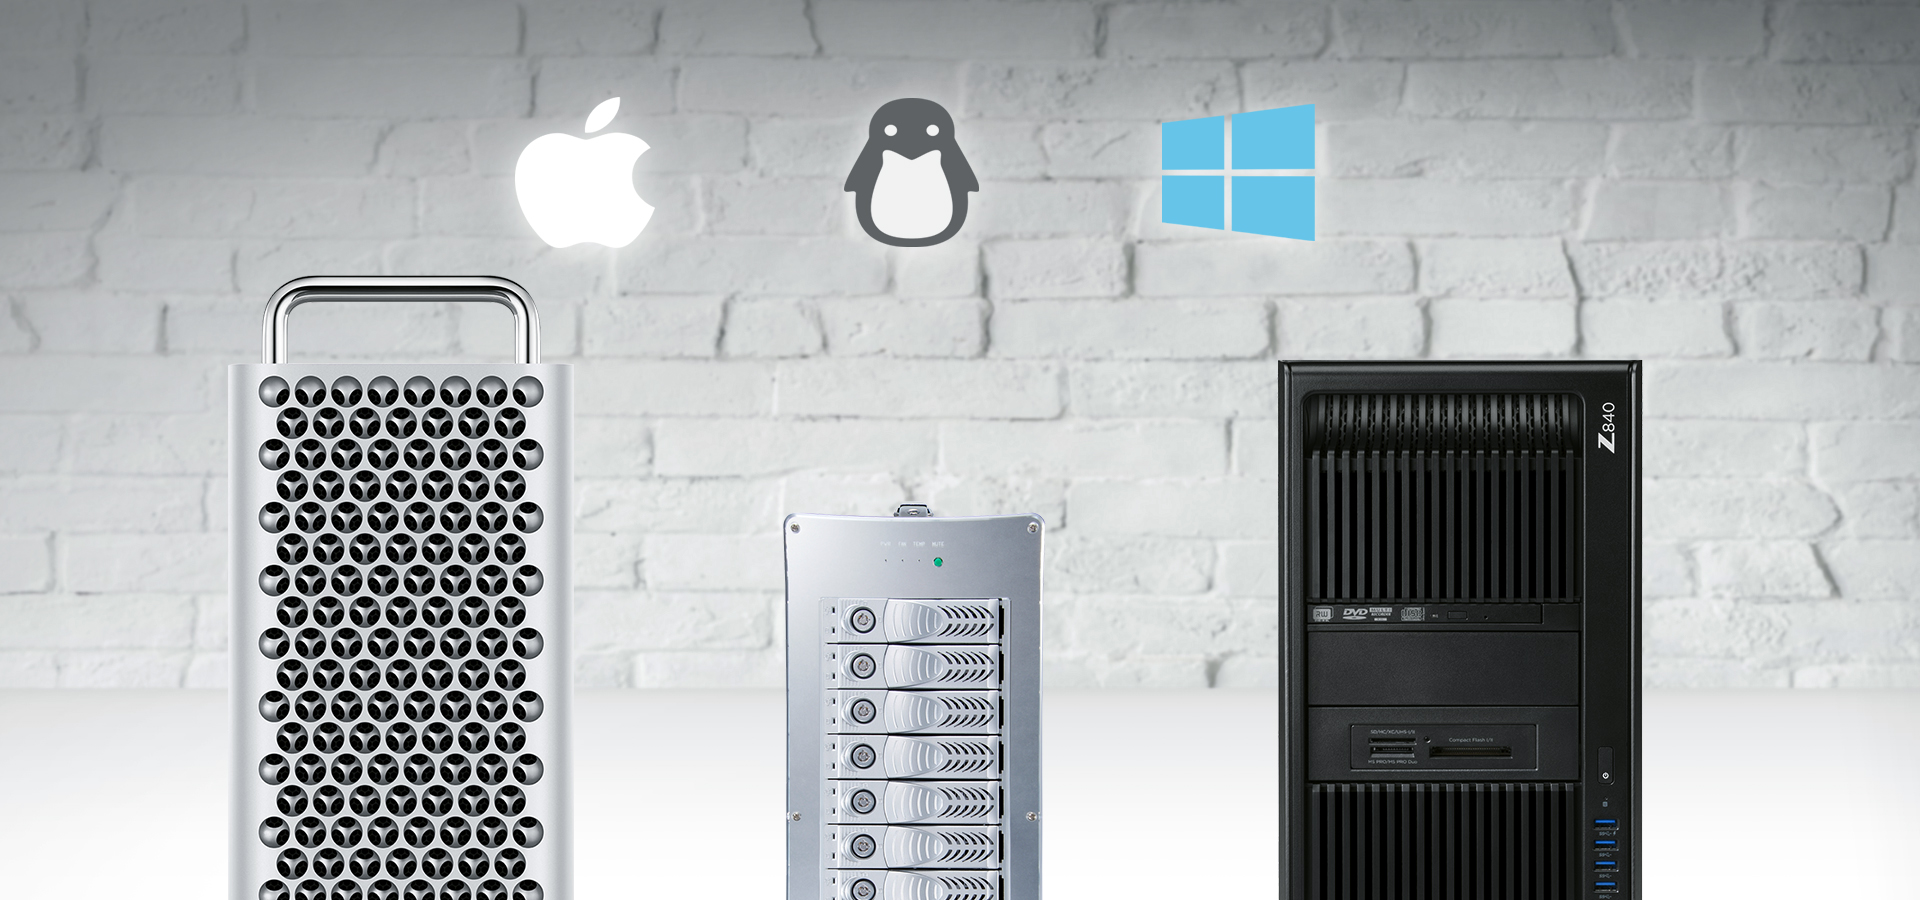 NA762A-G3 supports multi O.S, including mac, windows and linux, even the latest mac pro 2019.